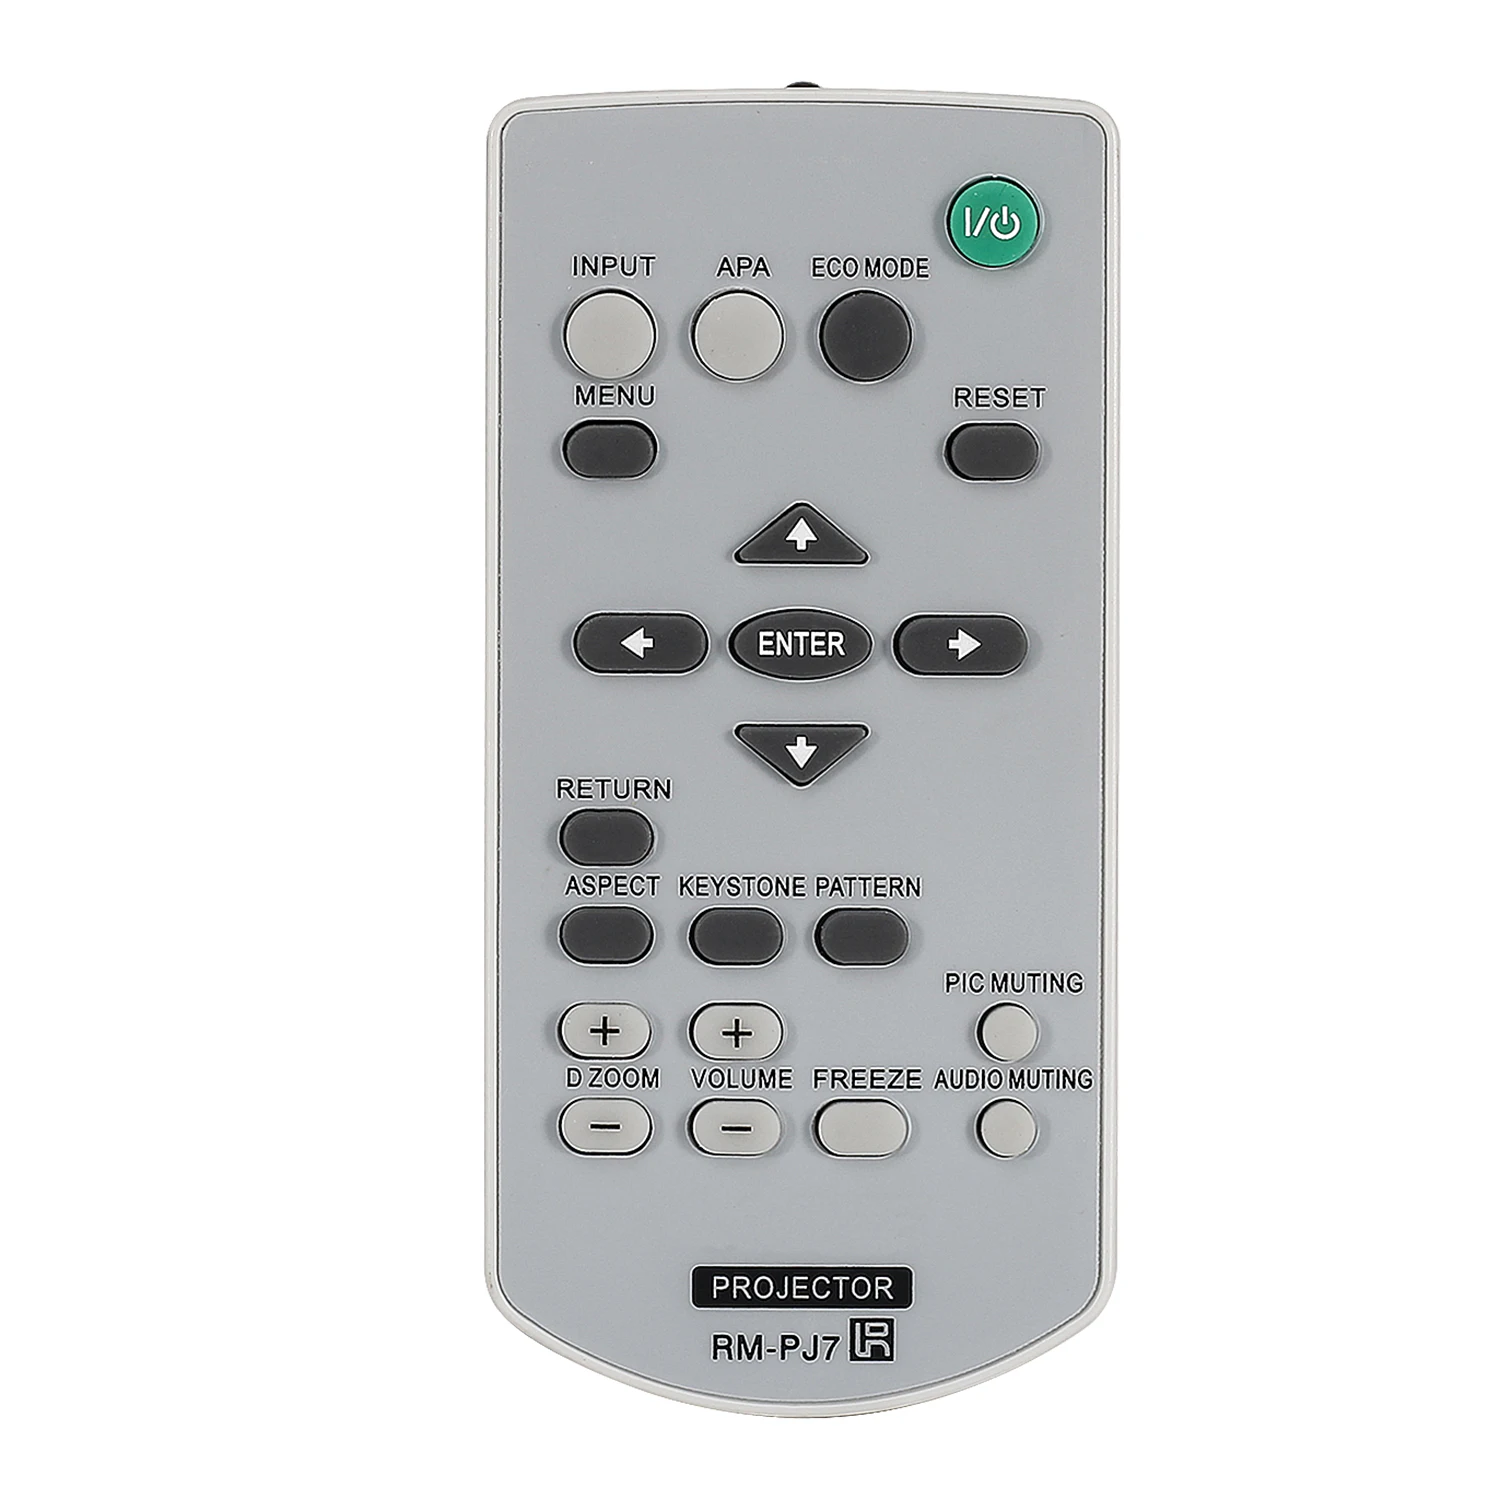 Remote Control for Sony Projector VPL-VW50 SXRD VPL-VW60 